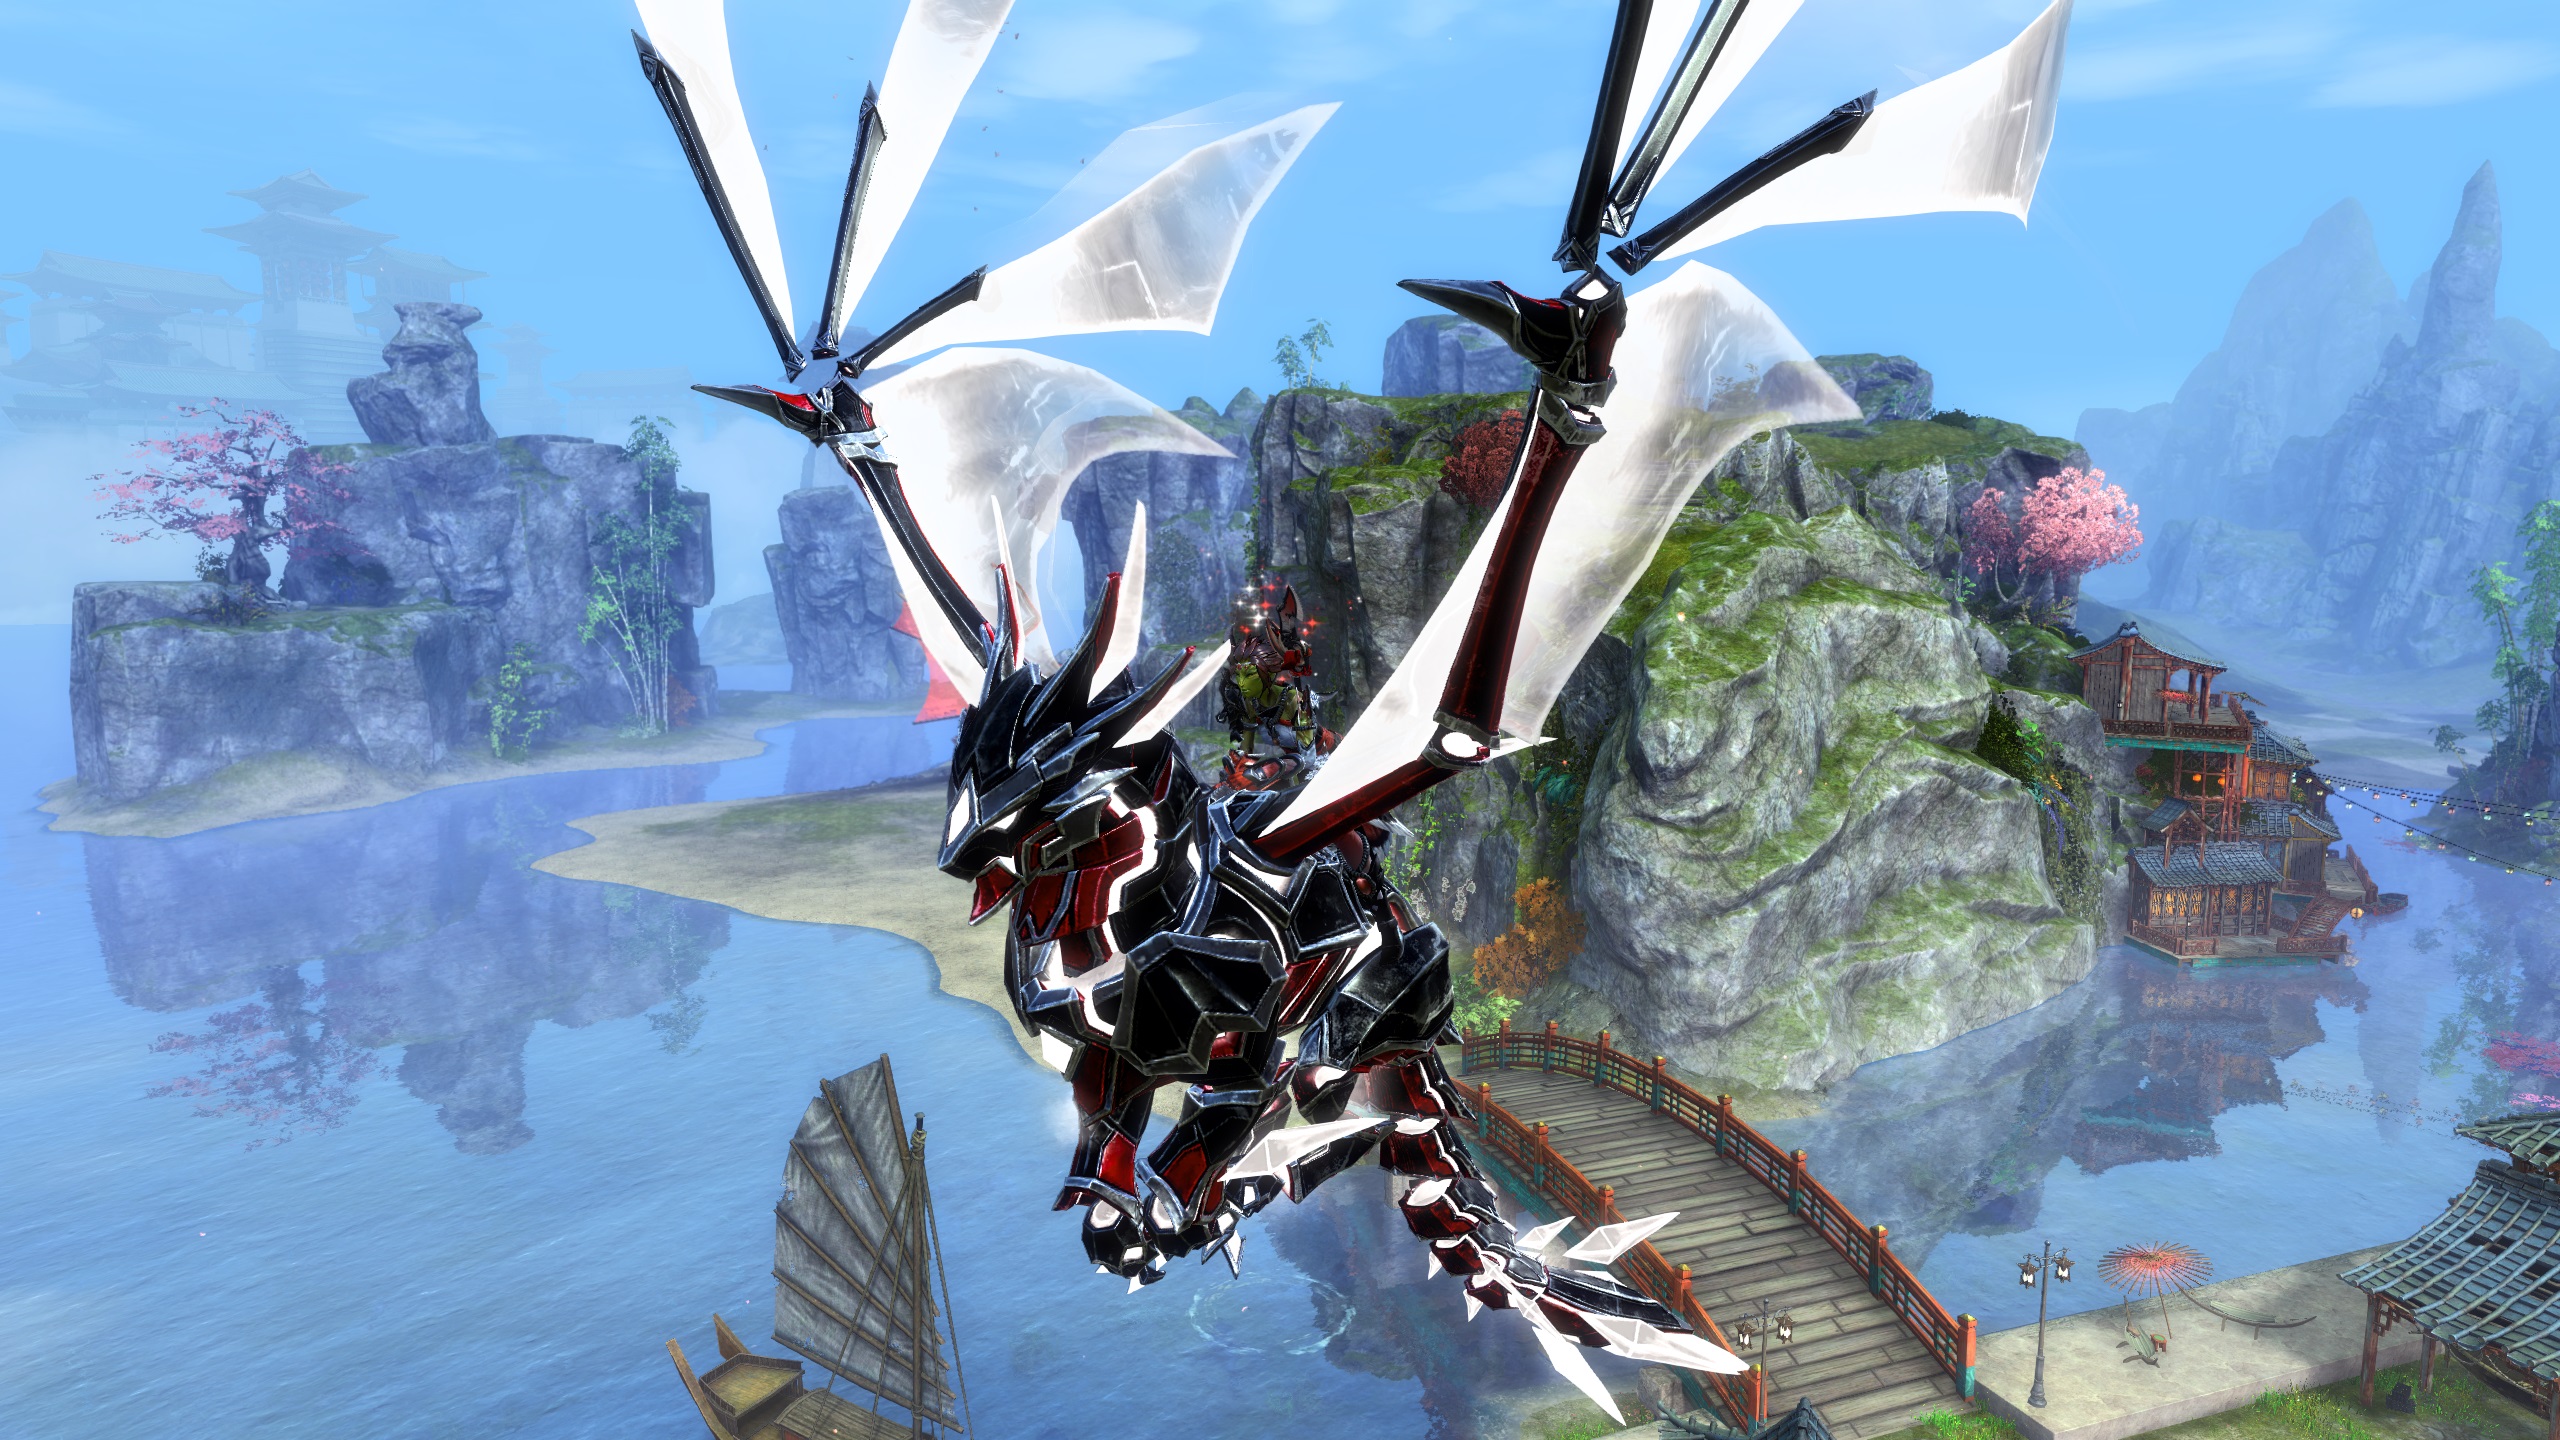  If you want to try WoW: Dragonflight's new rideable dragons, just play Guild Wars 2 